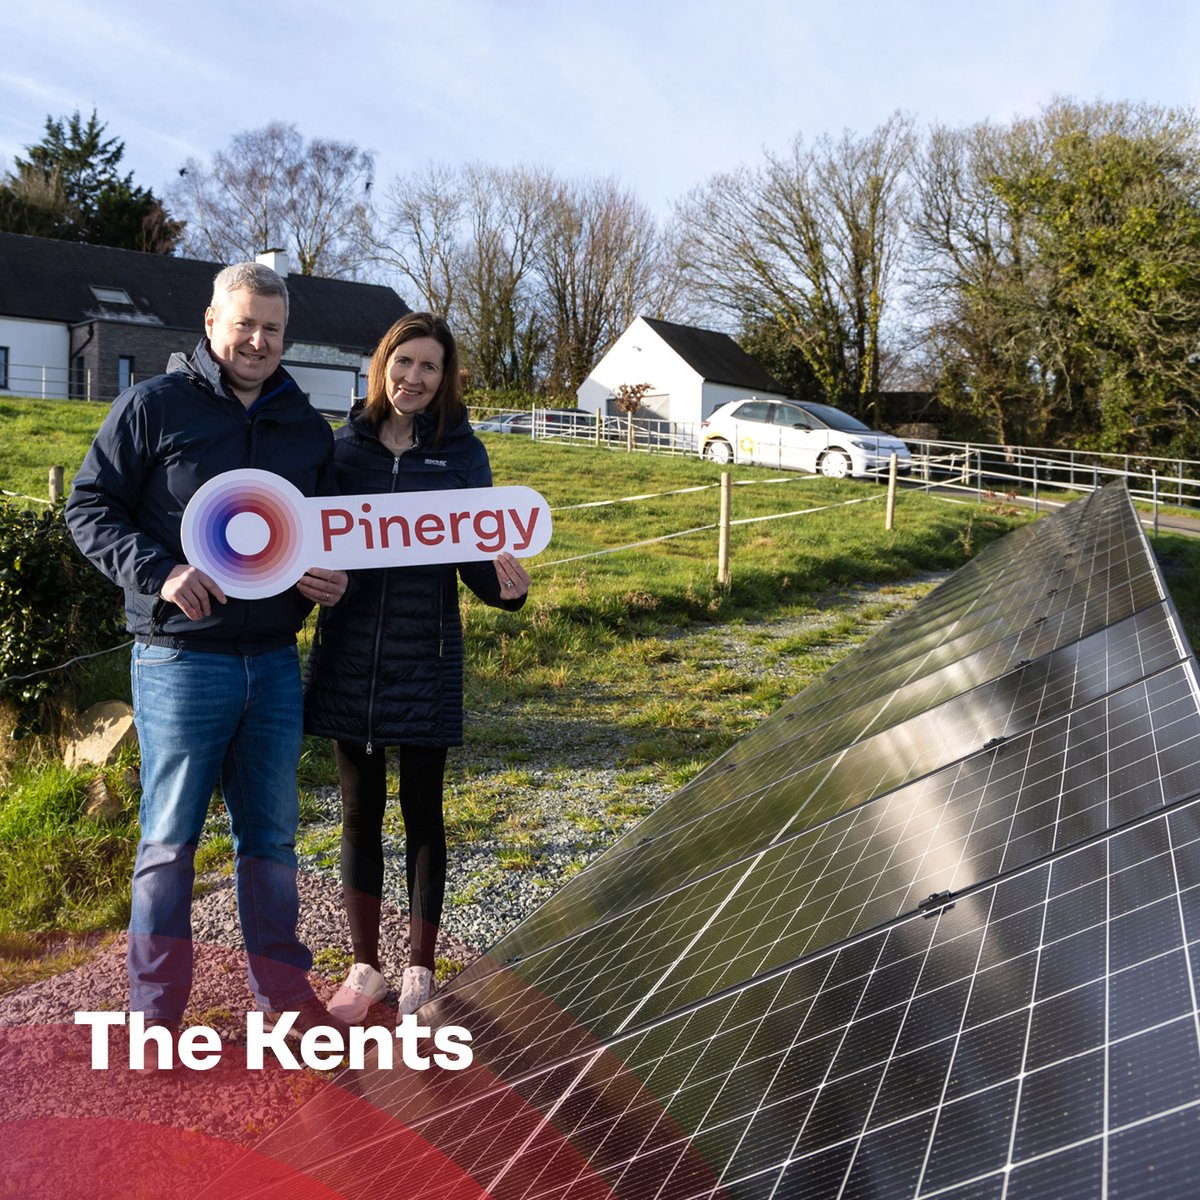 Microgeneration has become a source of pride for Thomas & friendly competition: “It’s like checking the news. I look at it every day to check the power we're using & compare it to the father-in-law.” 🍃💡 Read more here bit.ly/3J17YVp #SolarPower